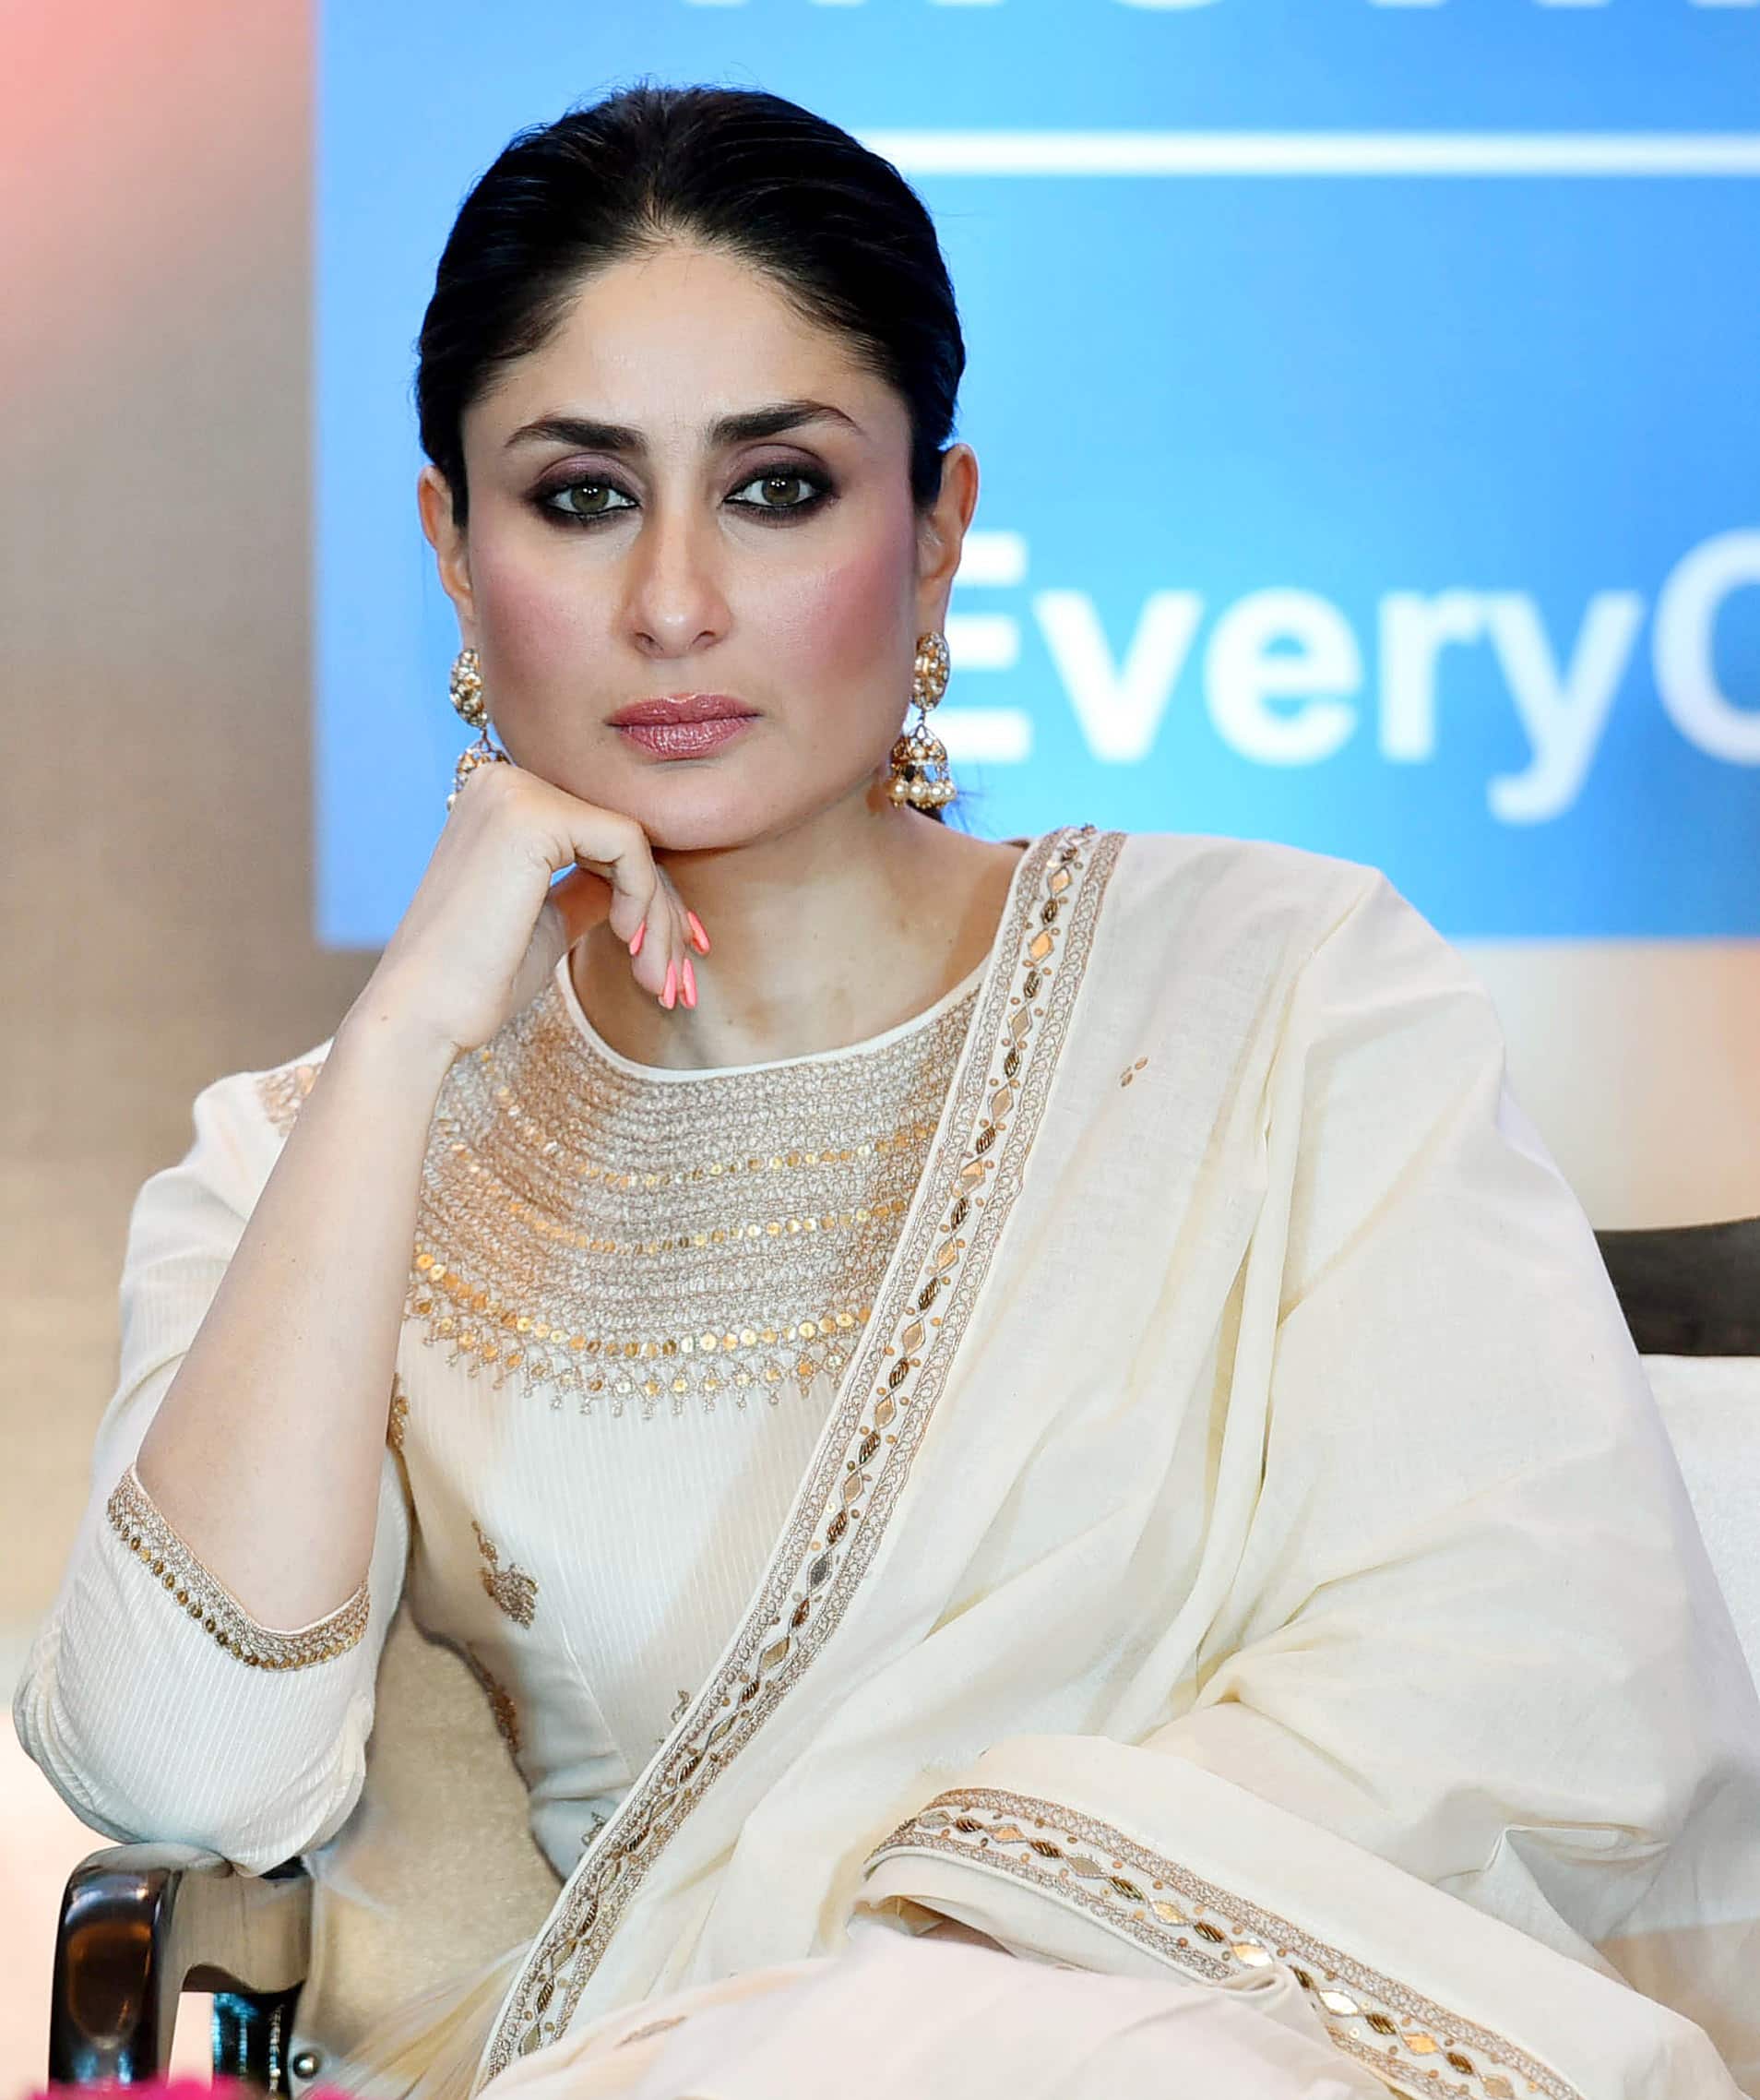 Kareena Kapoor Khan Gives A Royal Feel In Ethnic Wear At Unicef Event People News Zee News 